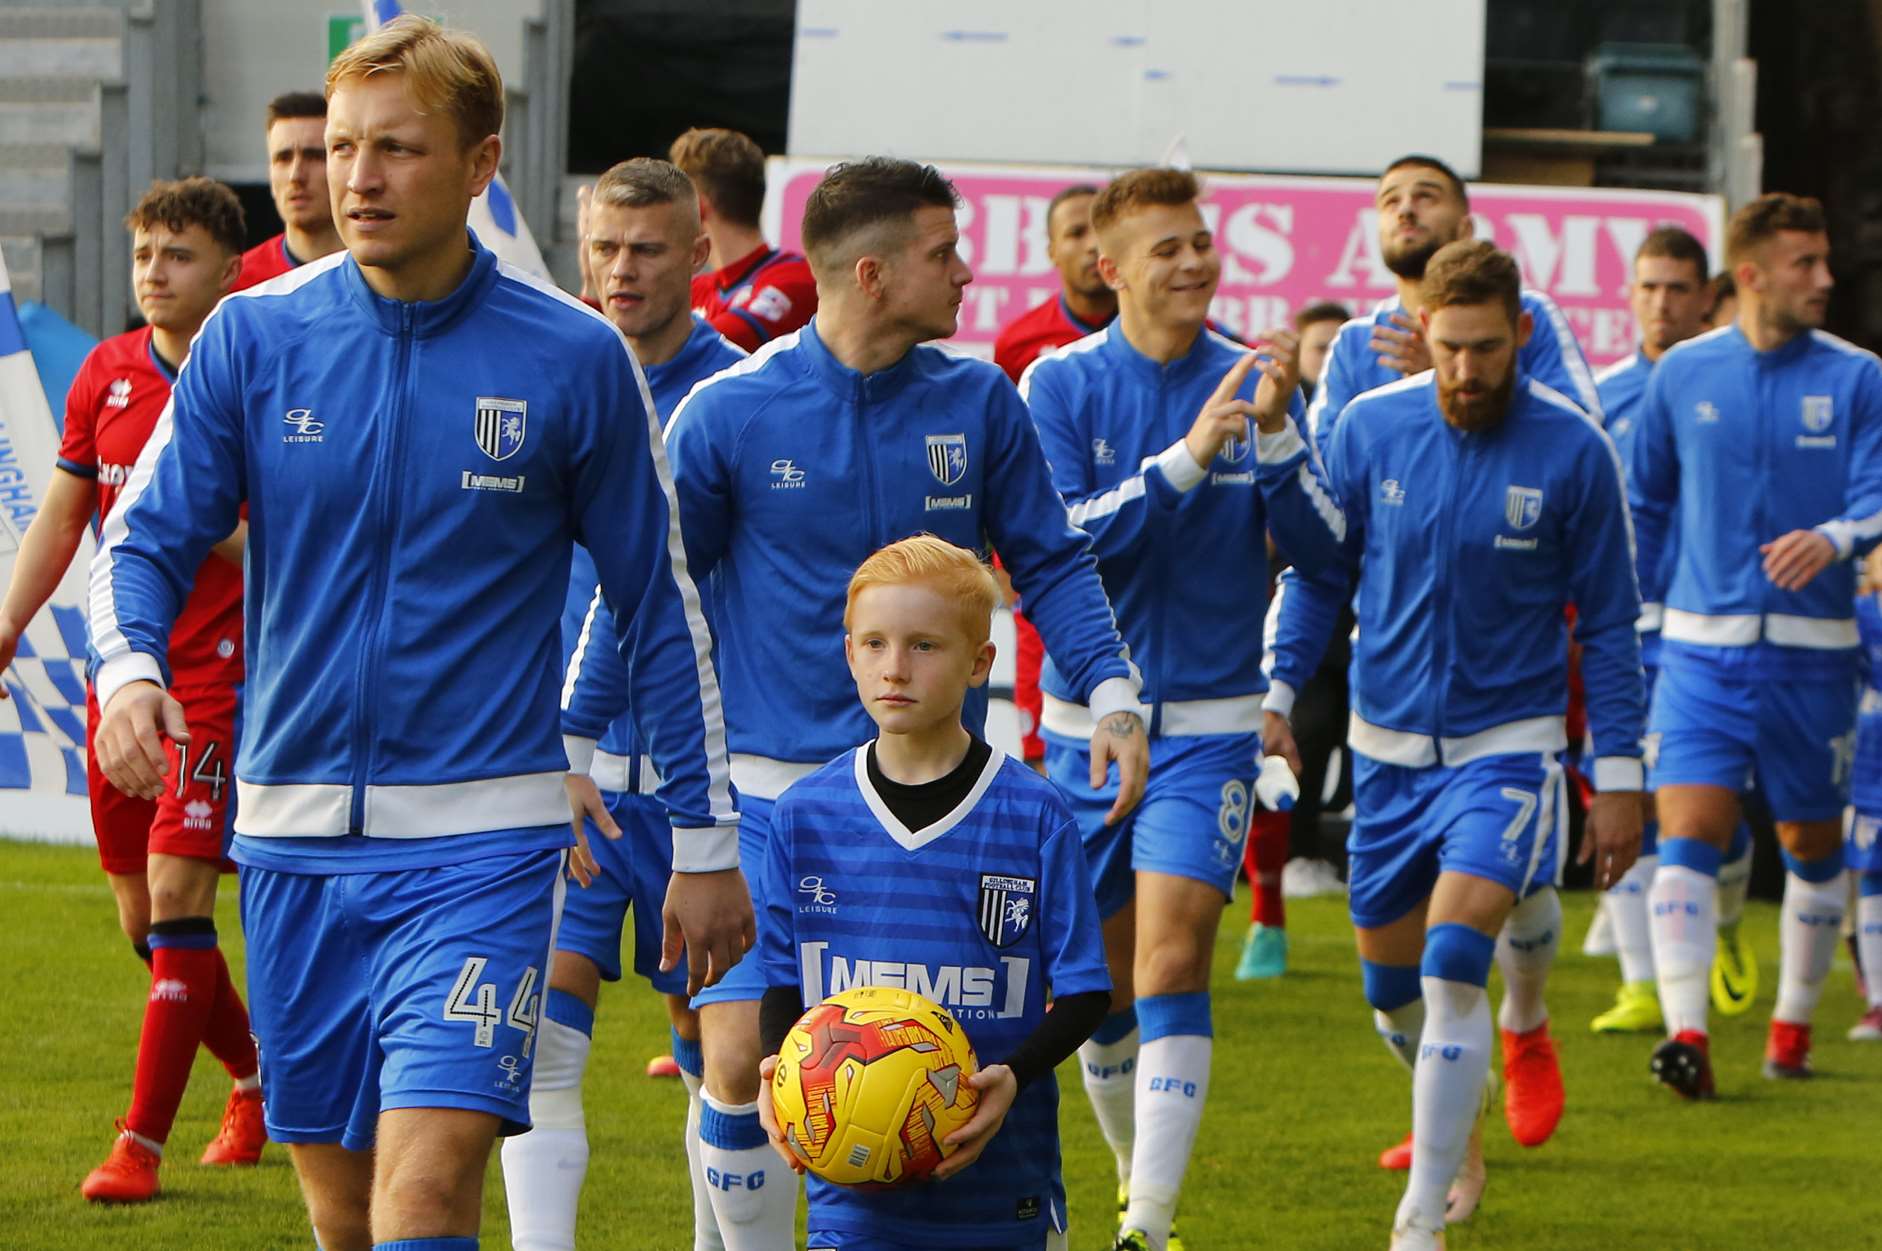 Skipper Josh Wright leads his side out with Gills chasing a win that would move them closer to the play-off places Picture: Andy Jones